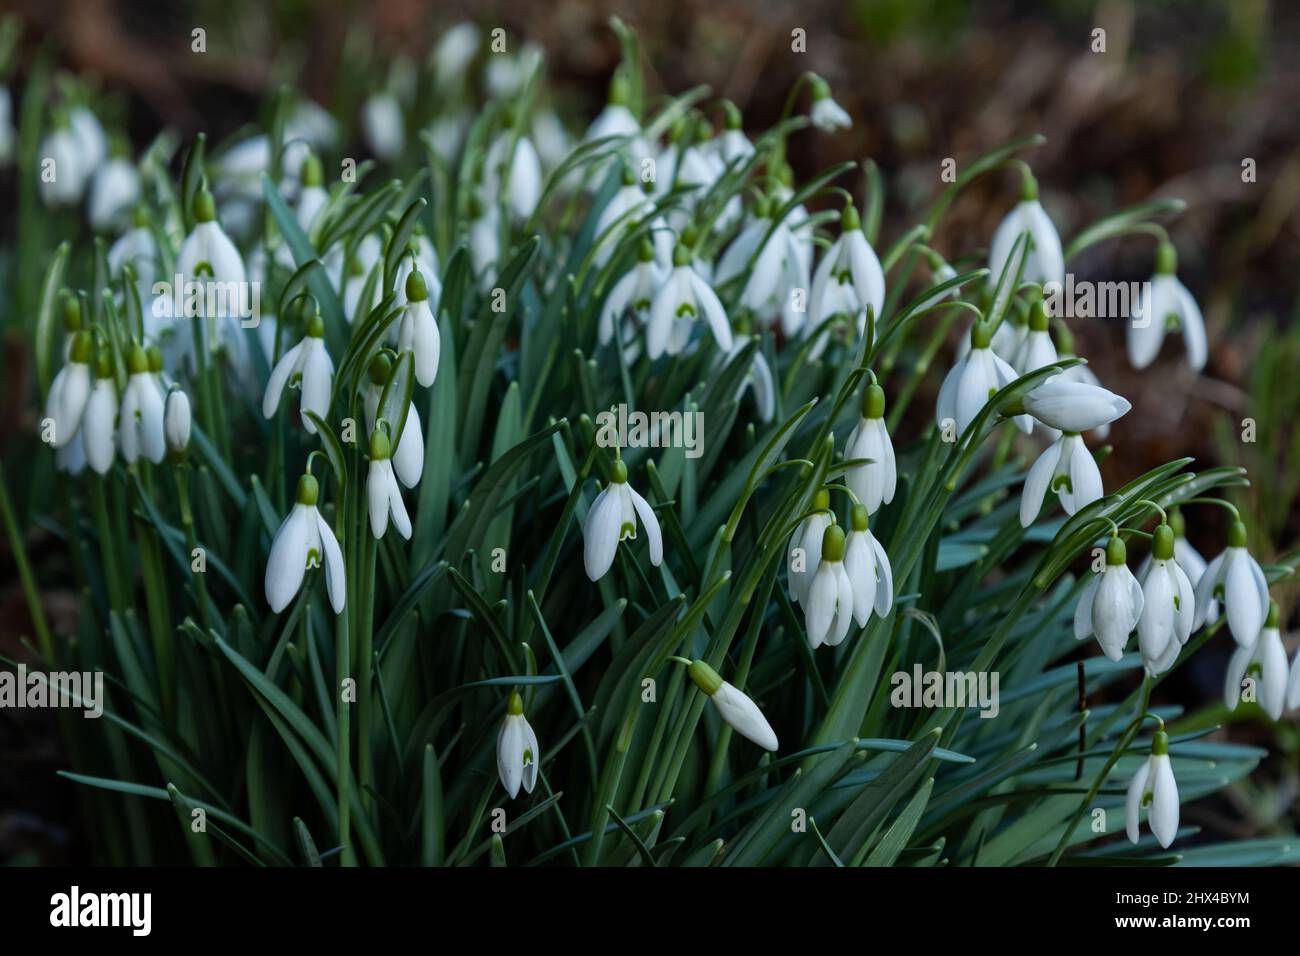 Snowdrops in the green growing under trees. This variety with a green centre is Galanthus Nivalis. Stock Photo